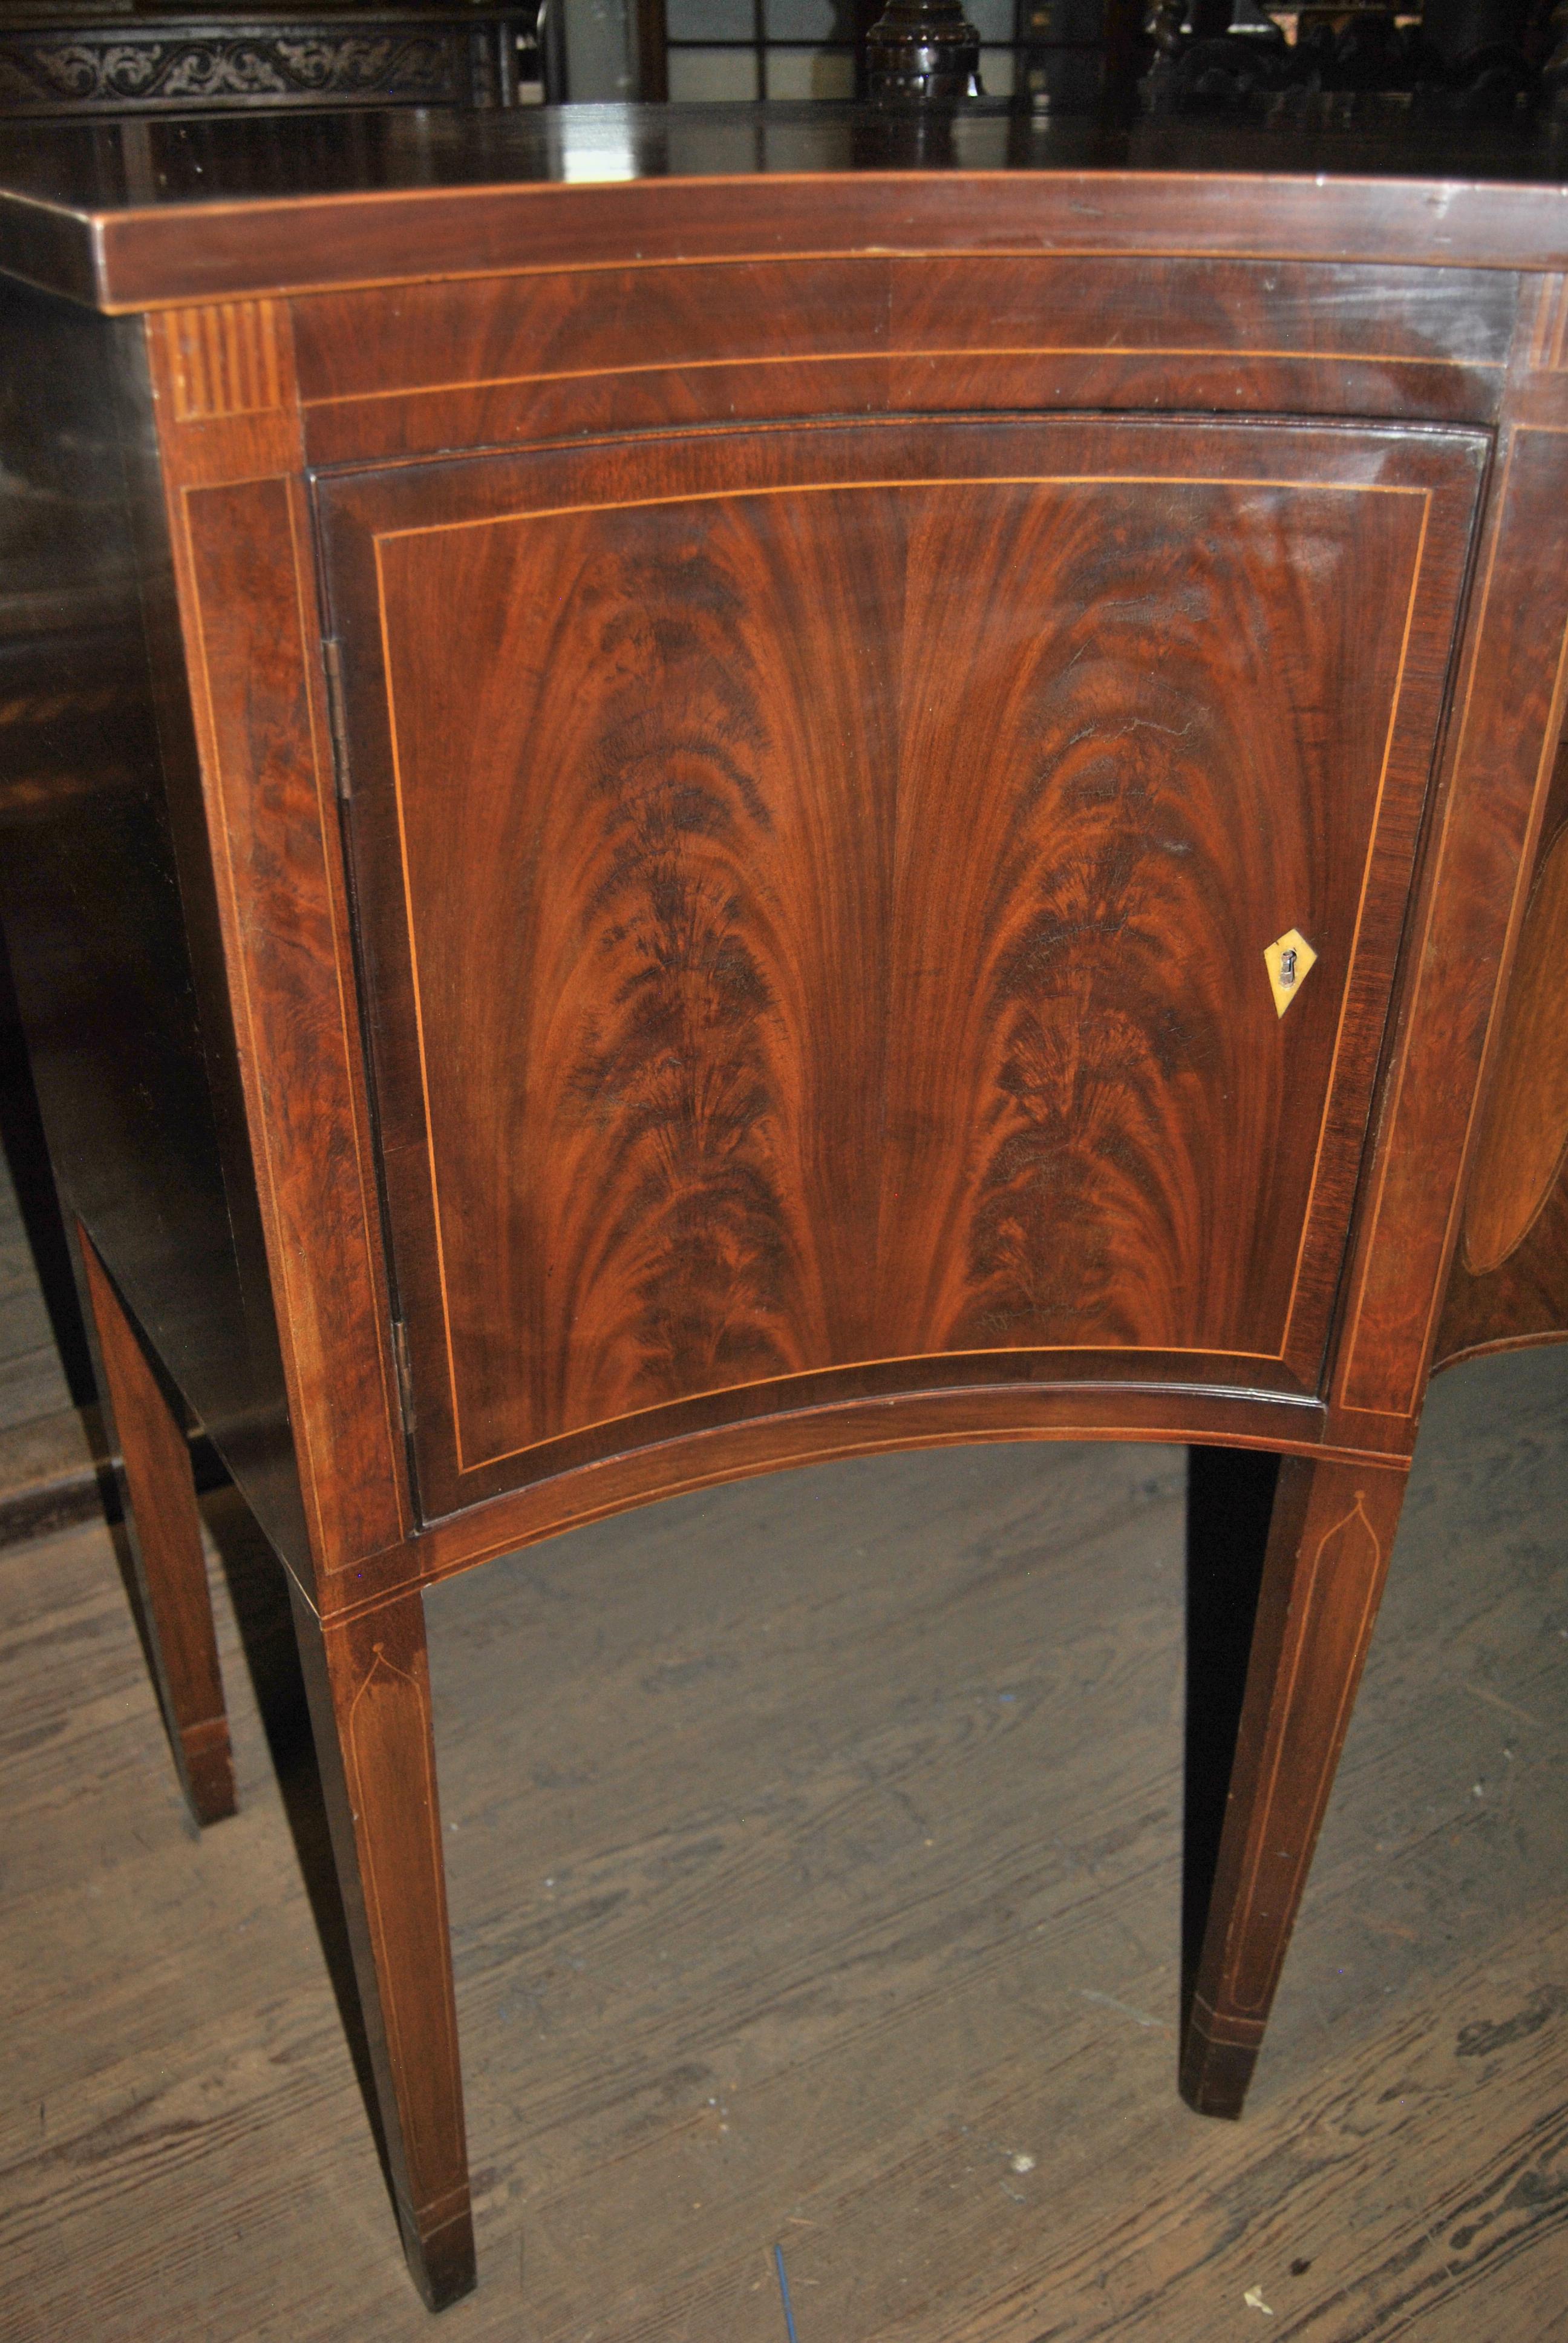 This is a mahogany sideboard, server, buffet made in England. The top is shaped to fit the form of the base and is concaved on the right and left sides with a bow front to the middle. The edge of the top has a String Inlay of Satinwood. Each of the